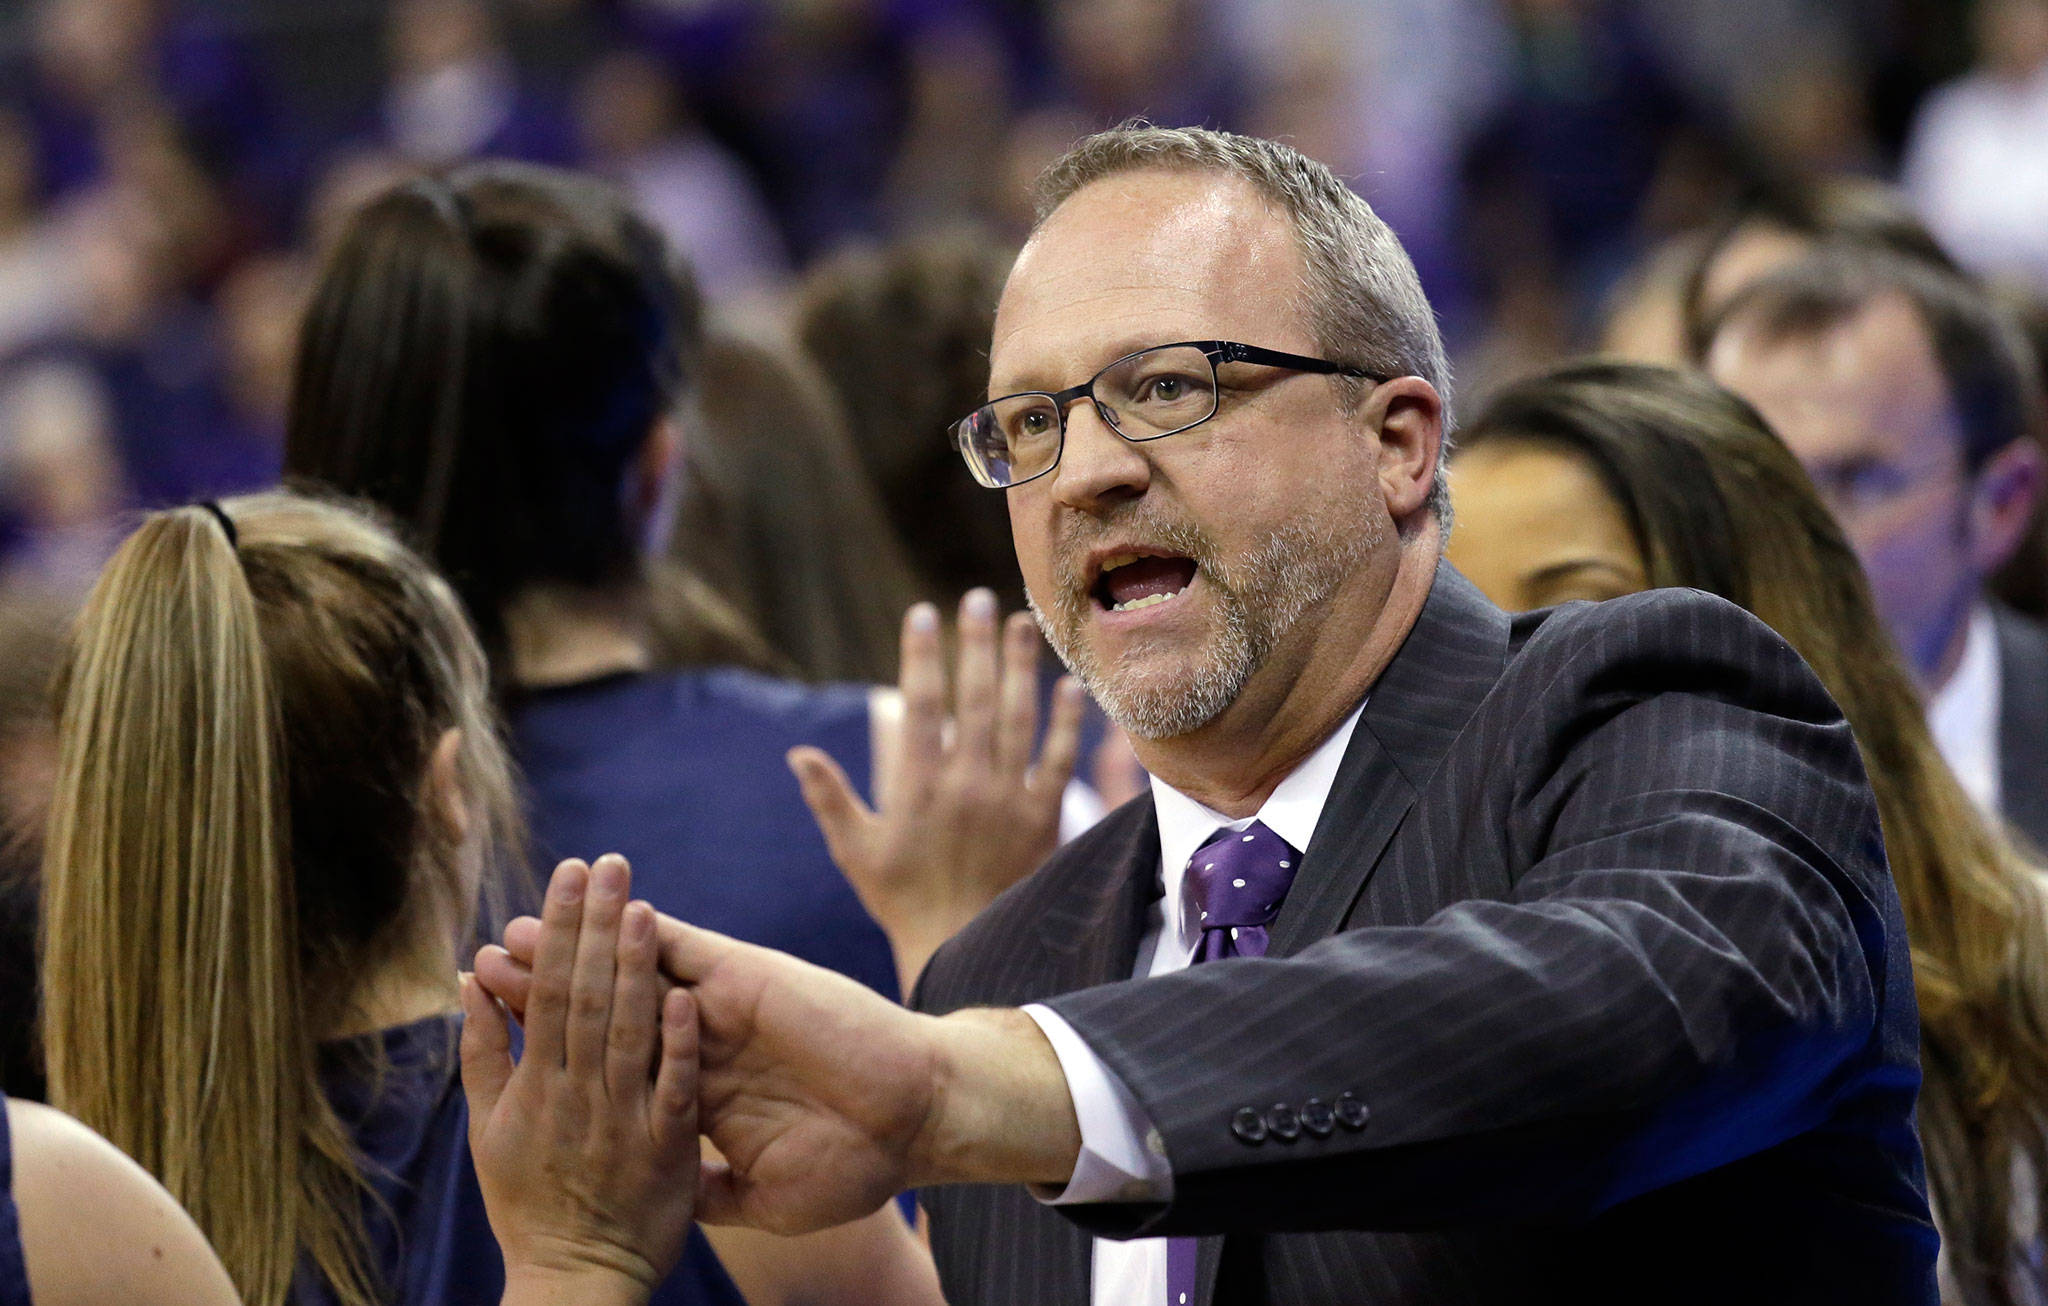 Washington women’s basketball coach Mike Neighbors interacts with Montana State players following Saturday’s first-round NCAA Tournament game. (AP Photo/Elaine Thompson)